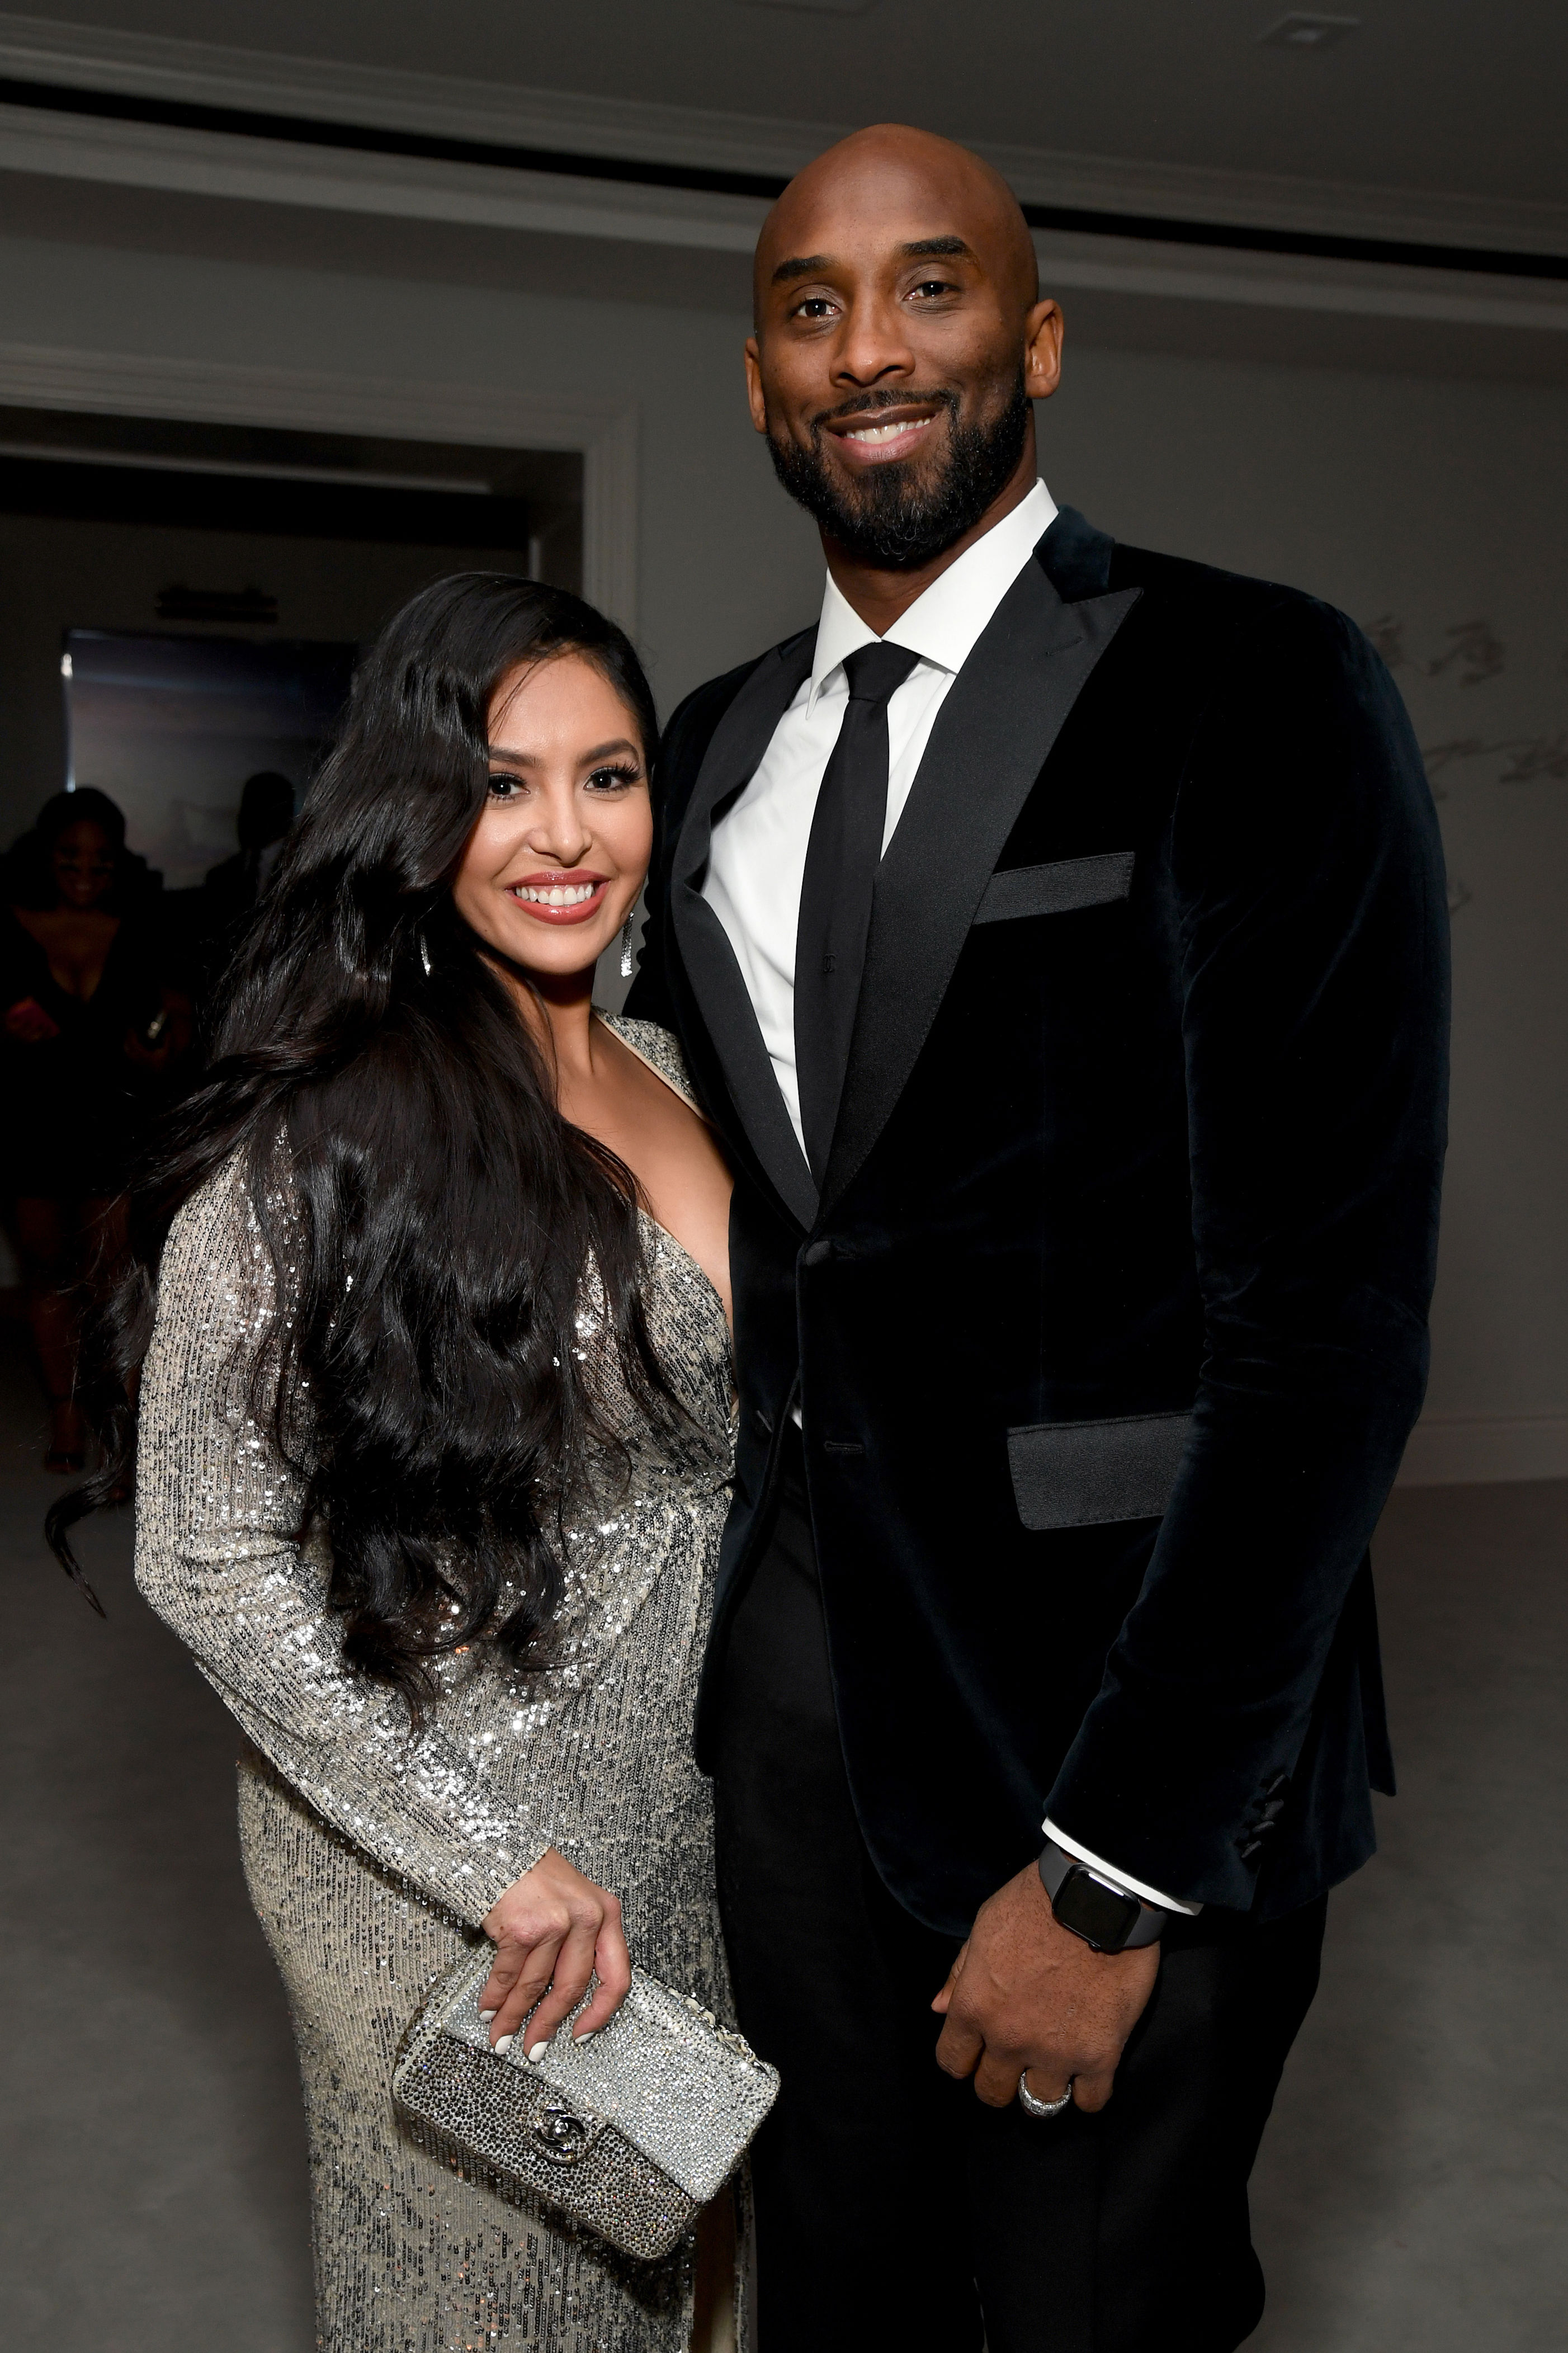 <p>Late NBA star Kobe Bryant and wife Vanessa Bryant experienced their fair share of marital issues. In 2003, Kobe was charged with raping a 19-year-old Colorado woman. He admitted to cheating on Vanessa but denied the sexual assault allegations. Vanessa stood by her man, reportedly with the help of an "apology" ring, and the charges were later dropped. She filed for divorce in 2011 but reconciled with Kobe the following year. They welcomed two more daughters after that. On Jan. 26, 2020, Kobe and their 13-year-old daughter, Gianna, <a href="https://www.wonderwall.com/celebrity/celebrities-react-death-kobe-bryant-3022112.gallery">were killed in a helicopter crash</a>.</p>